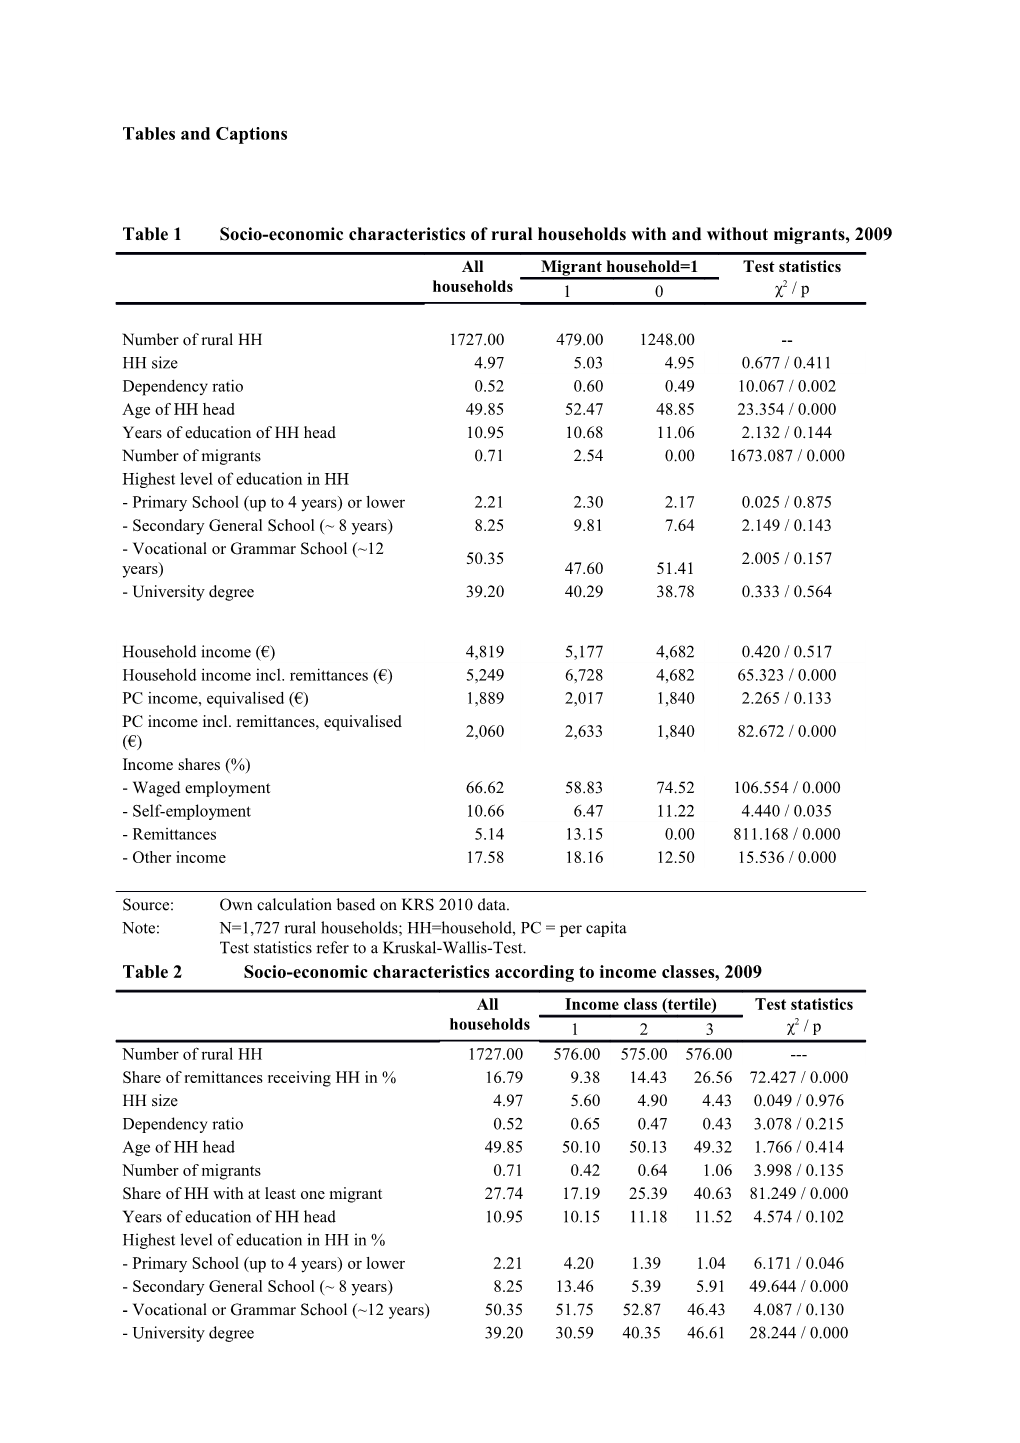 Table 1 Socio-Economic Characteristics of Rural Households with and Without Migrants, 2009